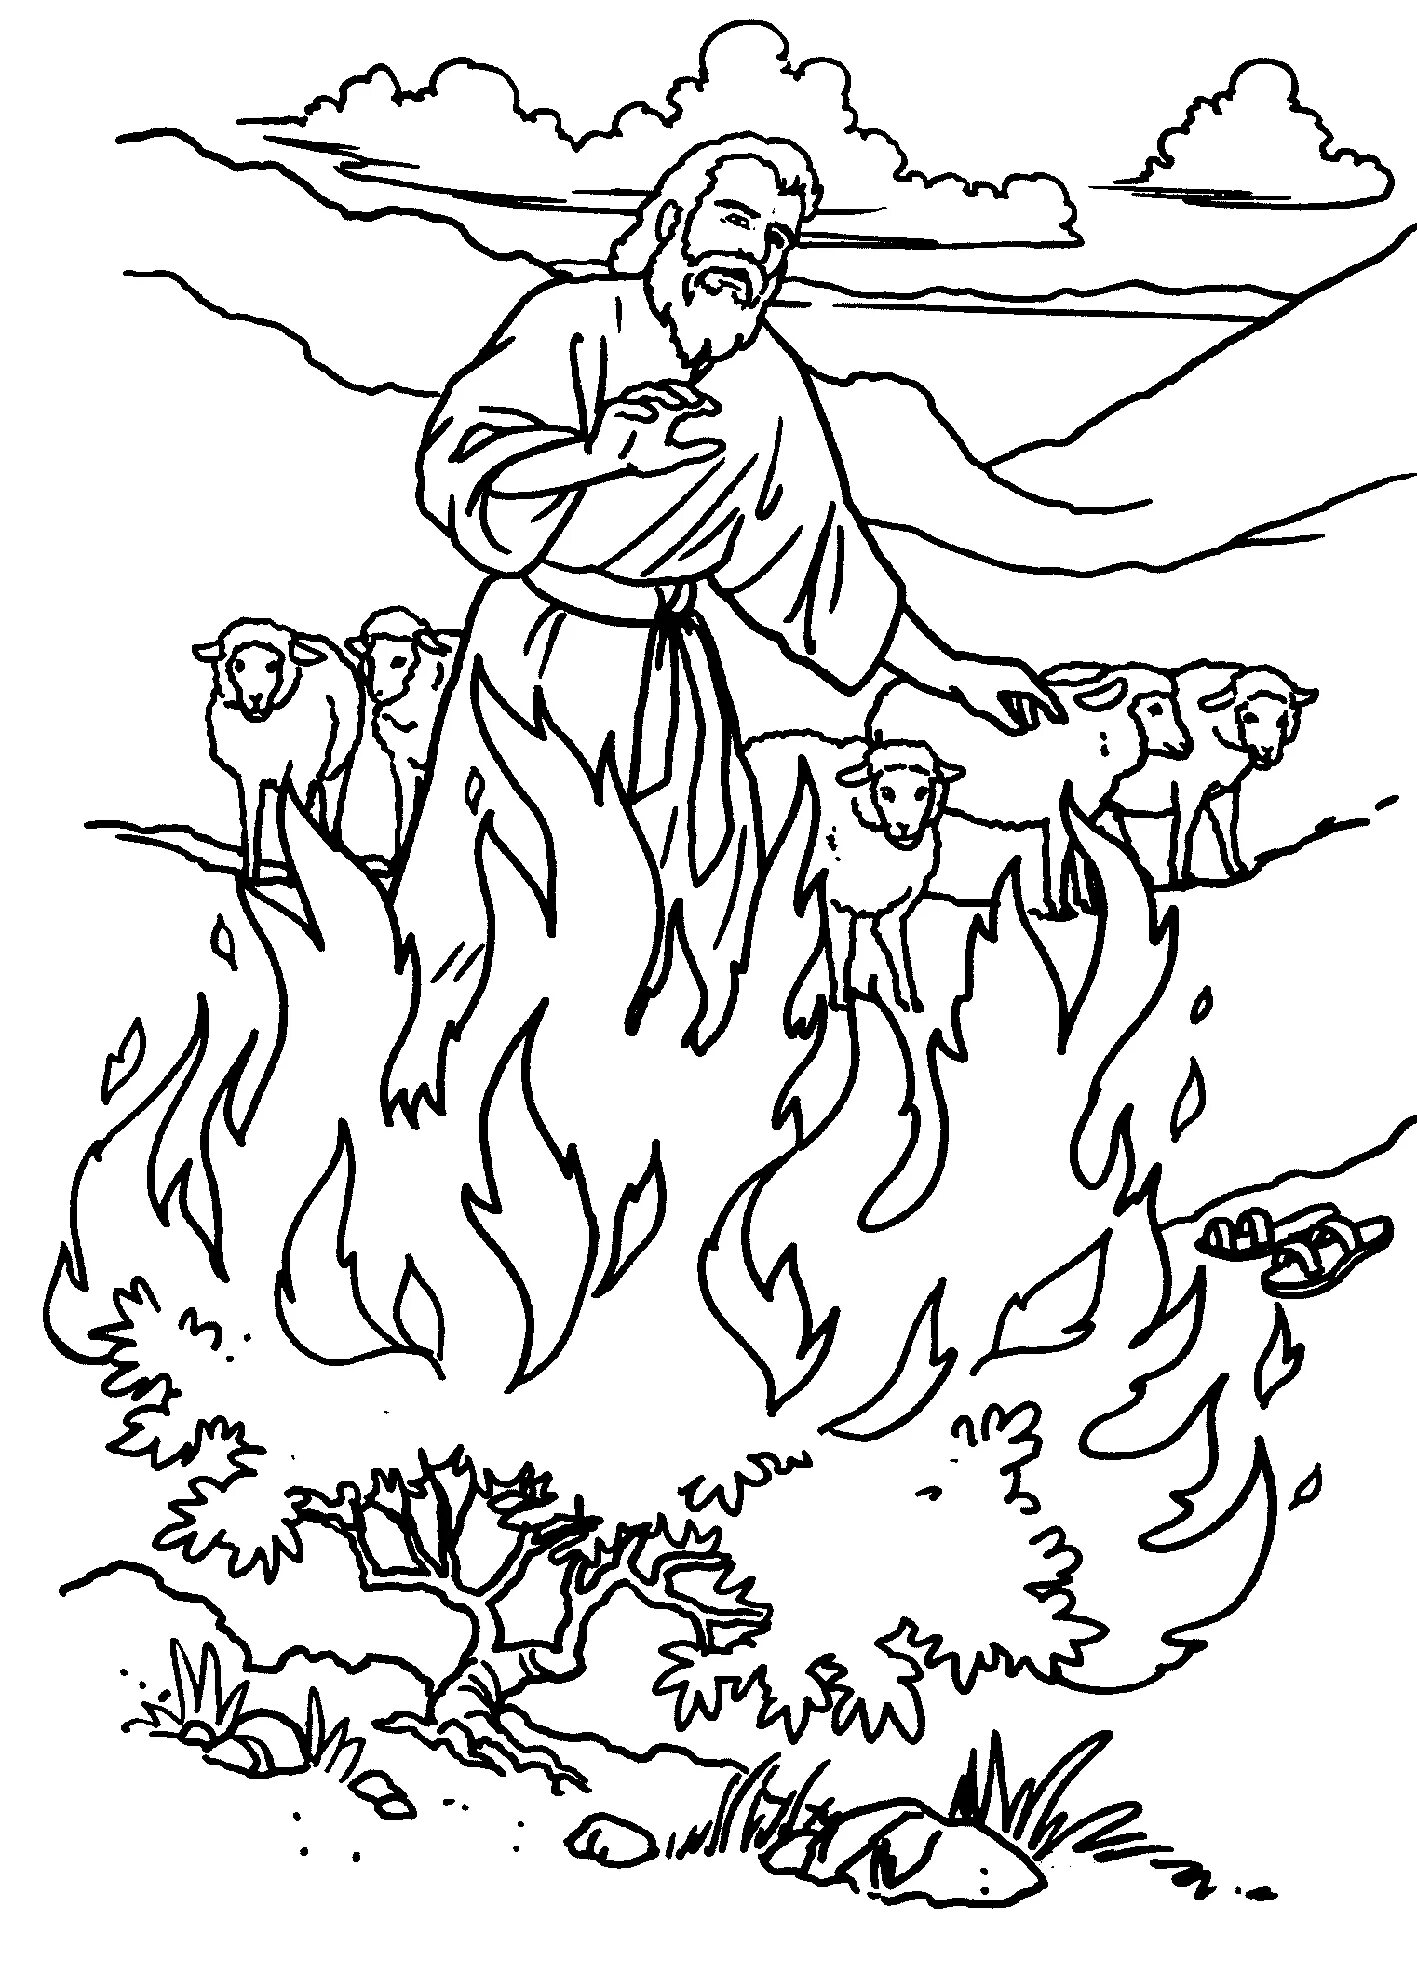 Large flaming bush coloring book for students